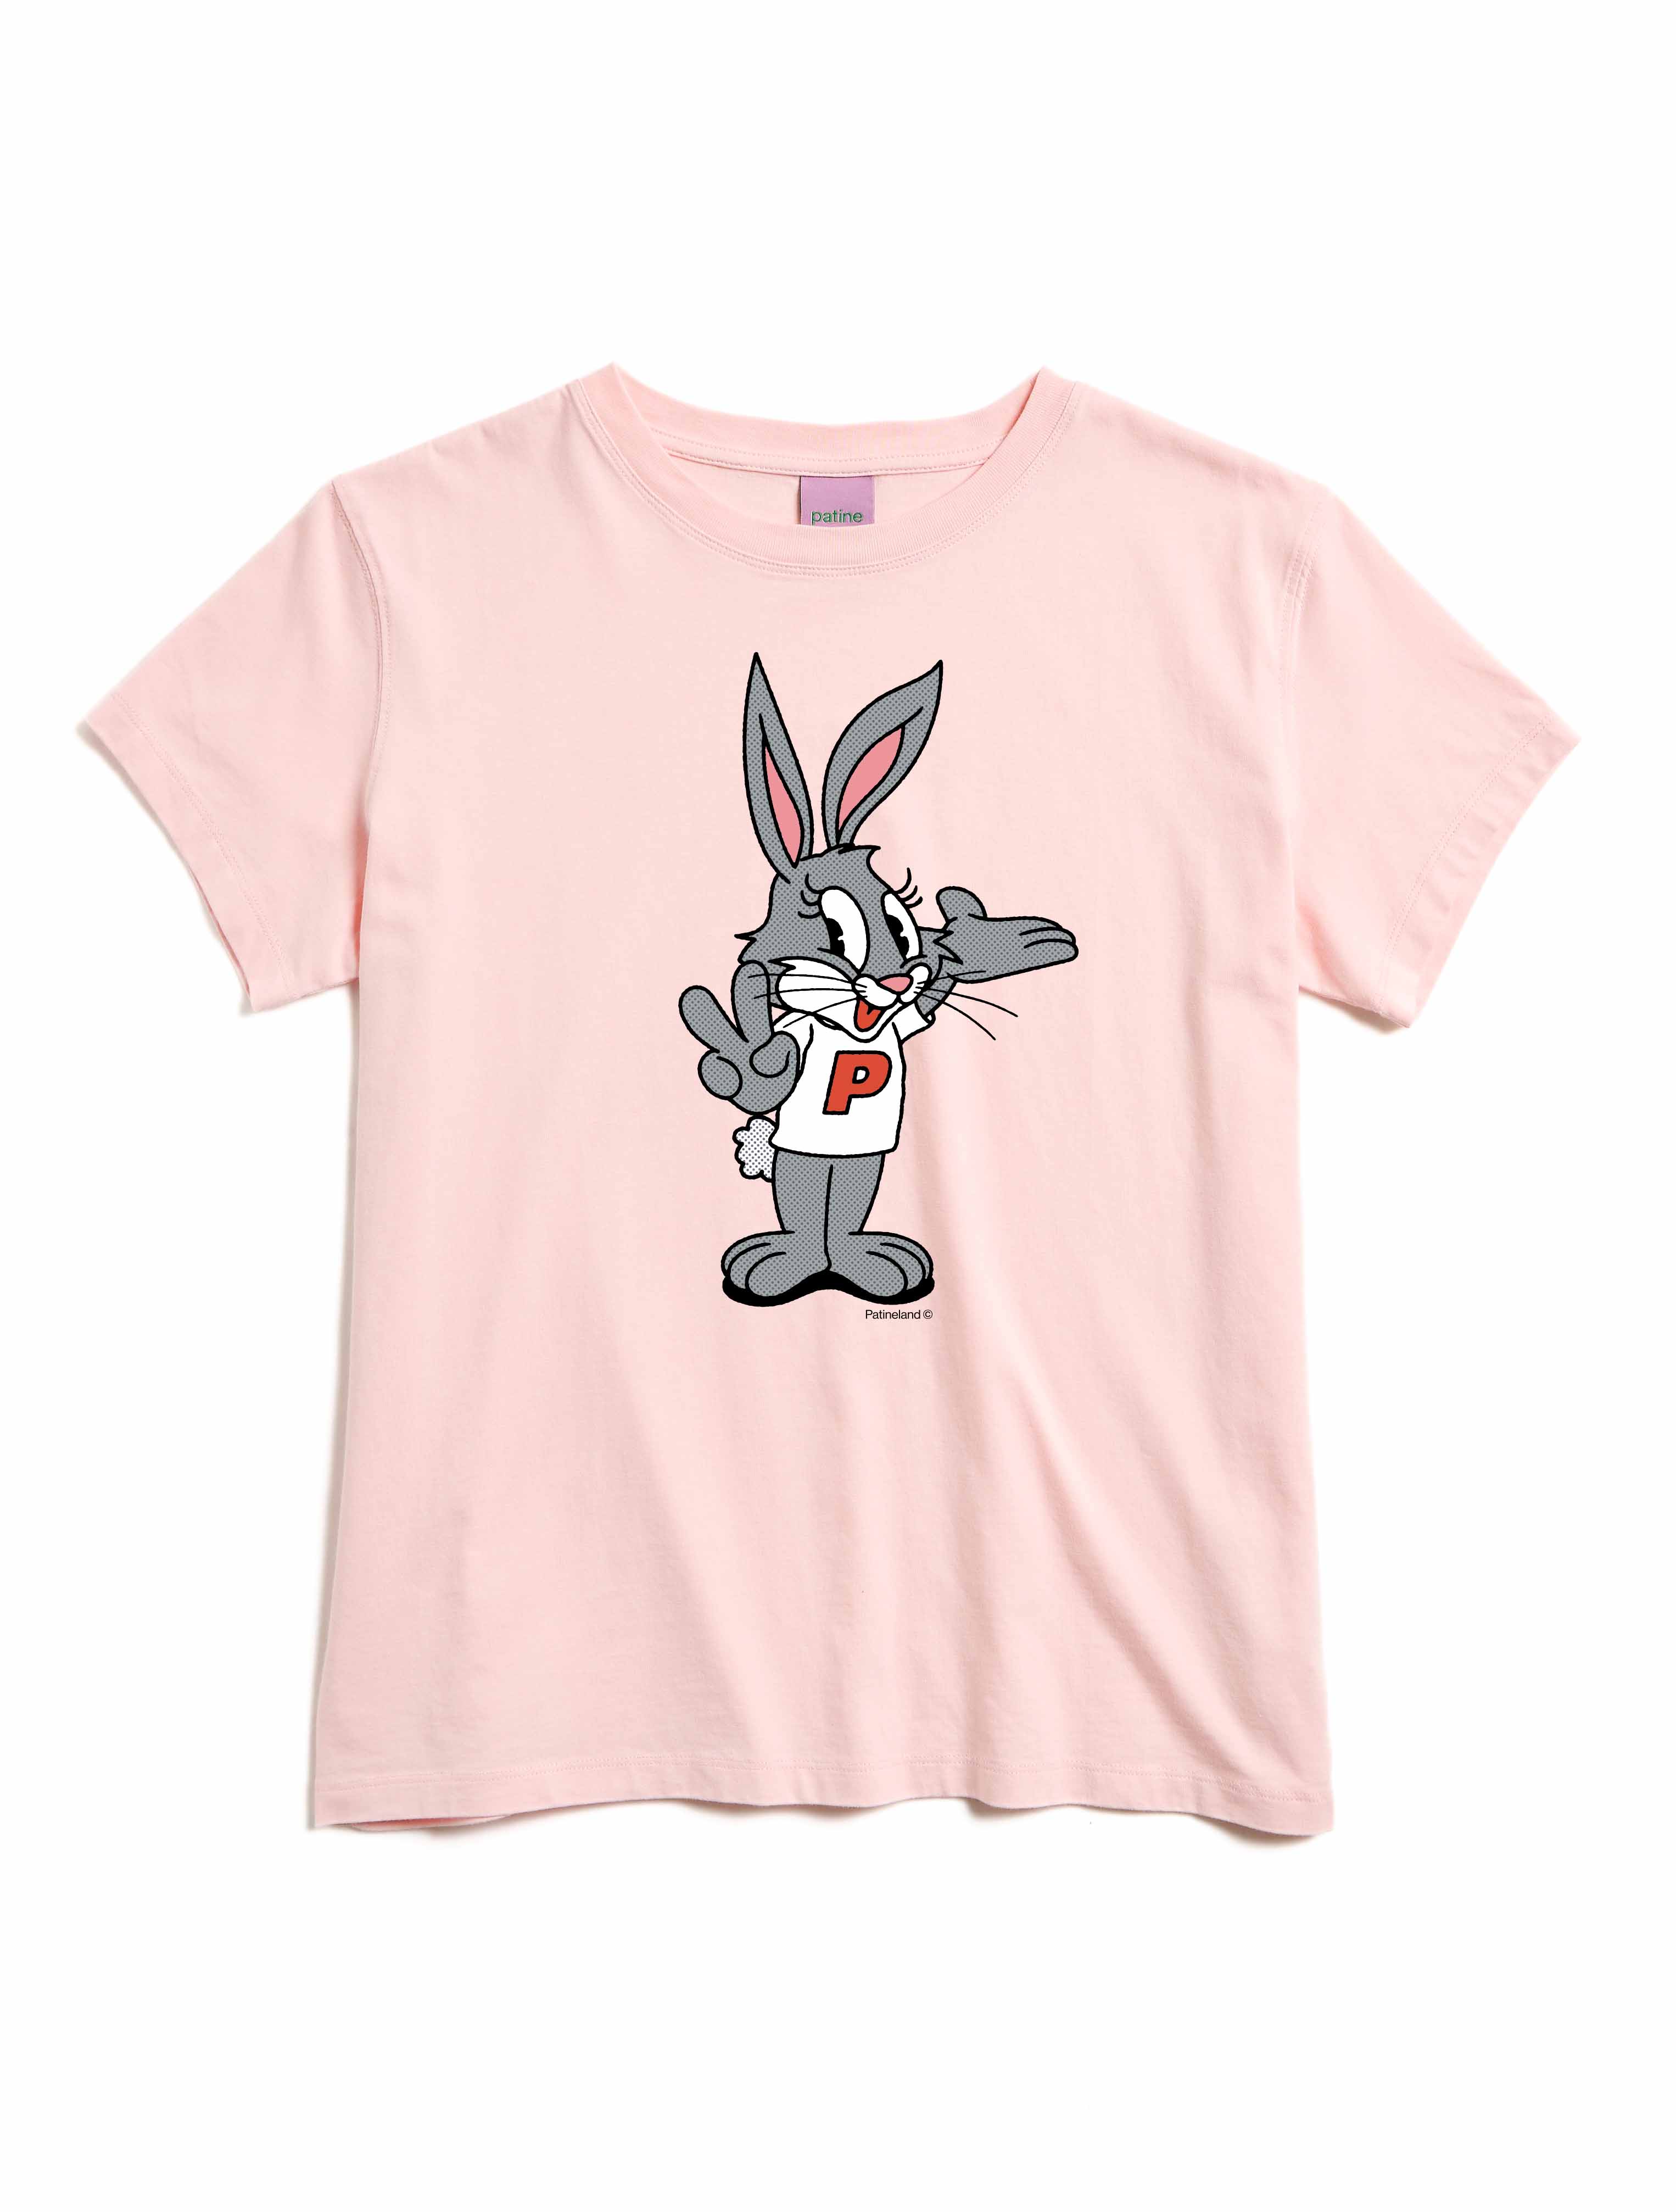 Le tee-shirt Iconic Willie® jersey bio-recyclé Bunny P.